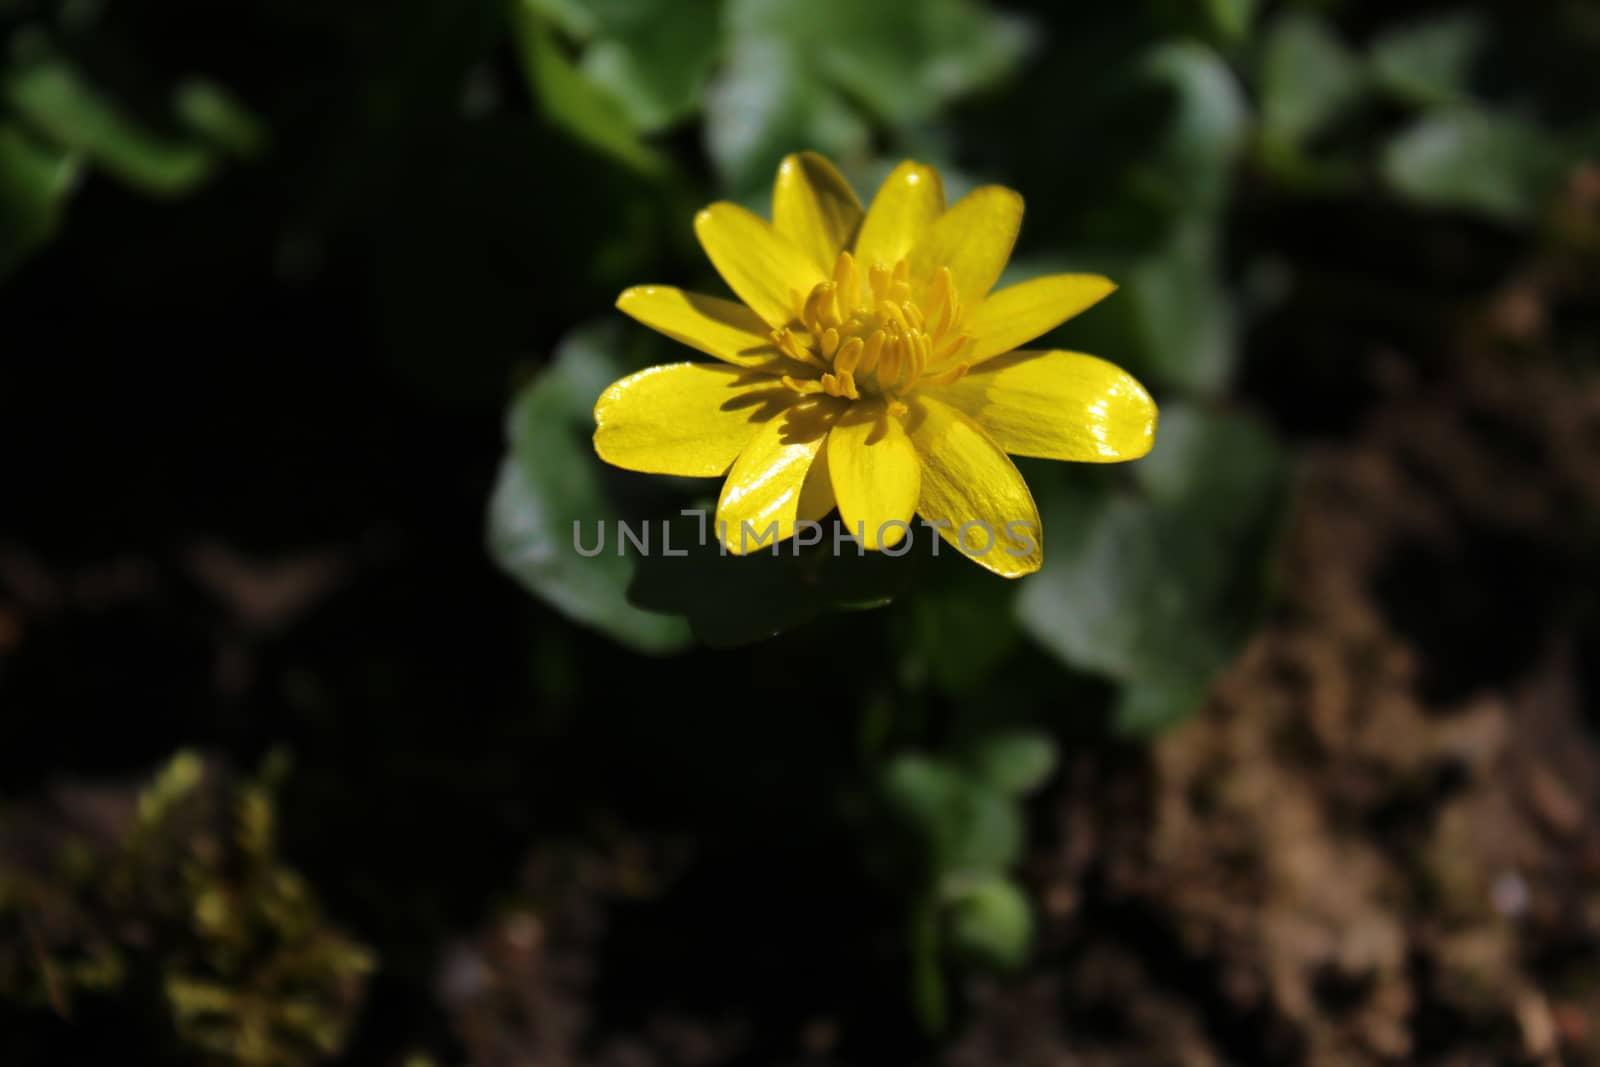 The picture shows a buttercup in the garden.